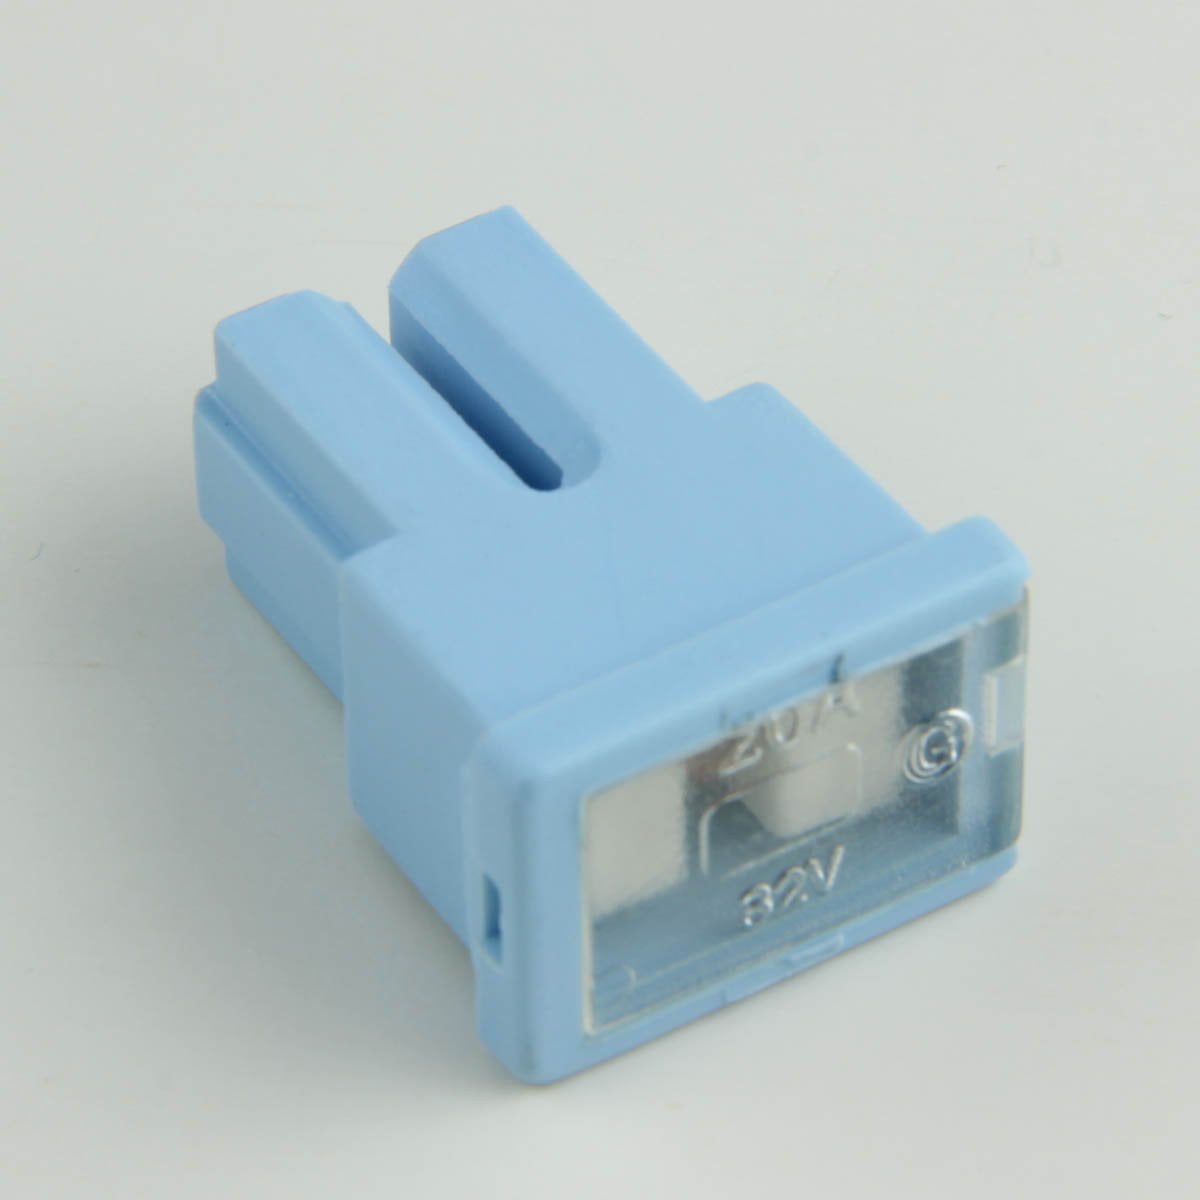 Details about   Saroop 20 AMPS Slow Blow Female Fuse Sky Blue Pack of 2 